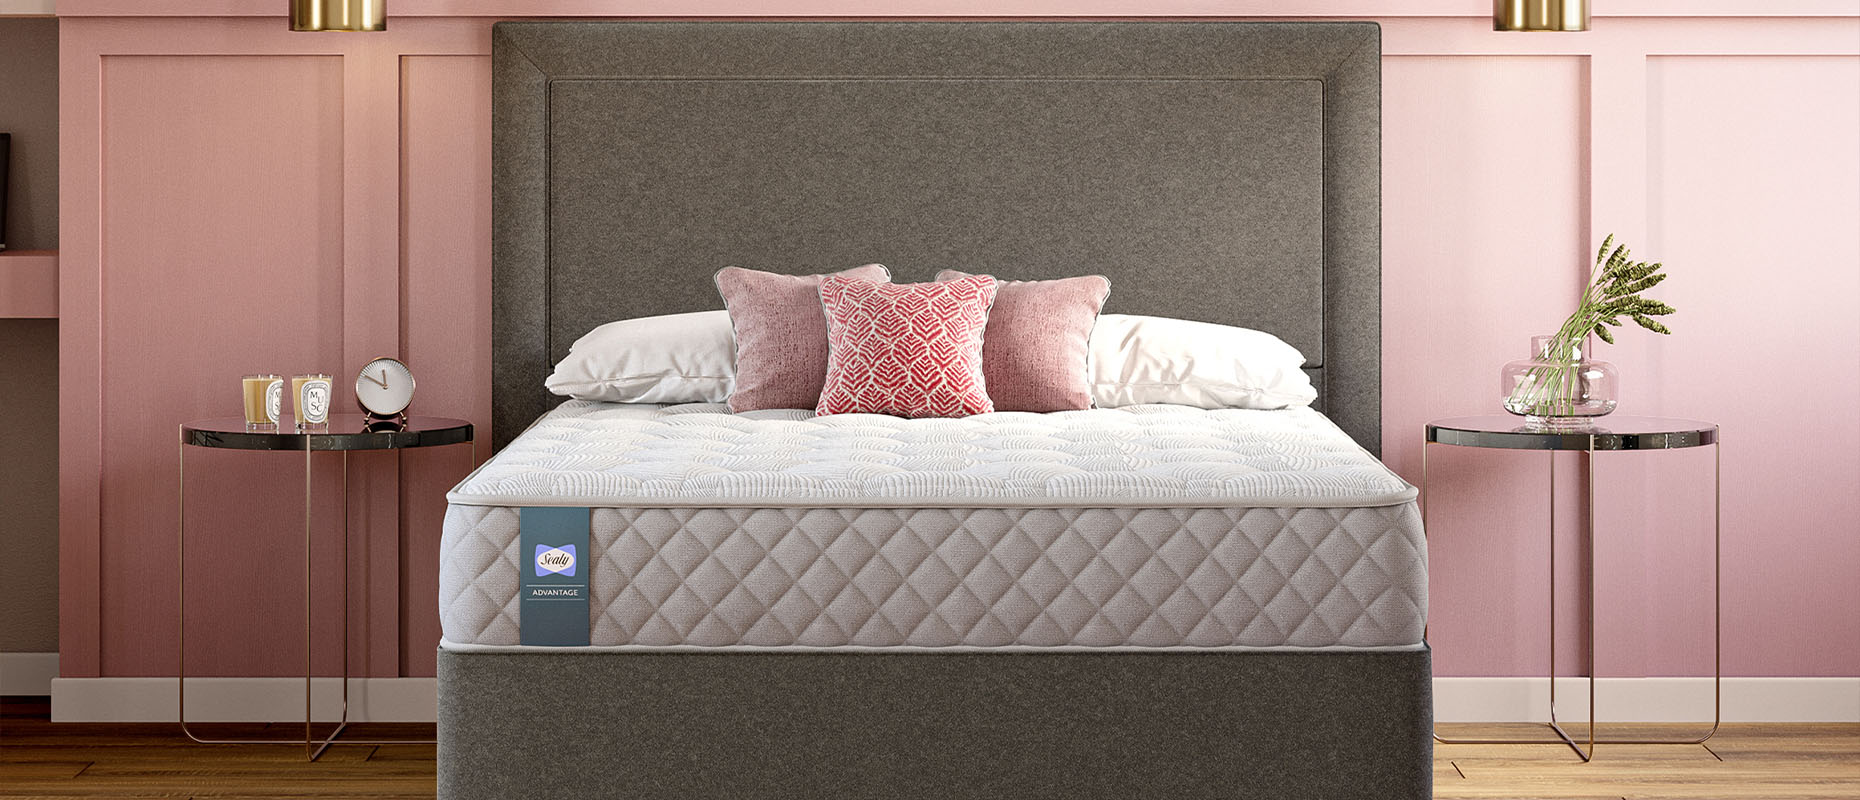 Applecross Divan collection from Sealy at Forrest Furnishing